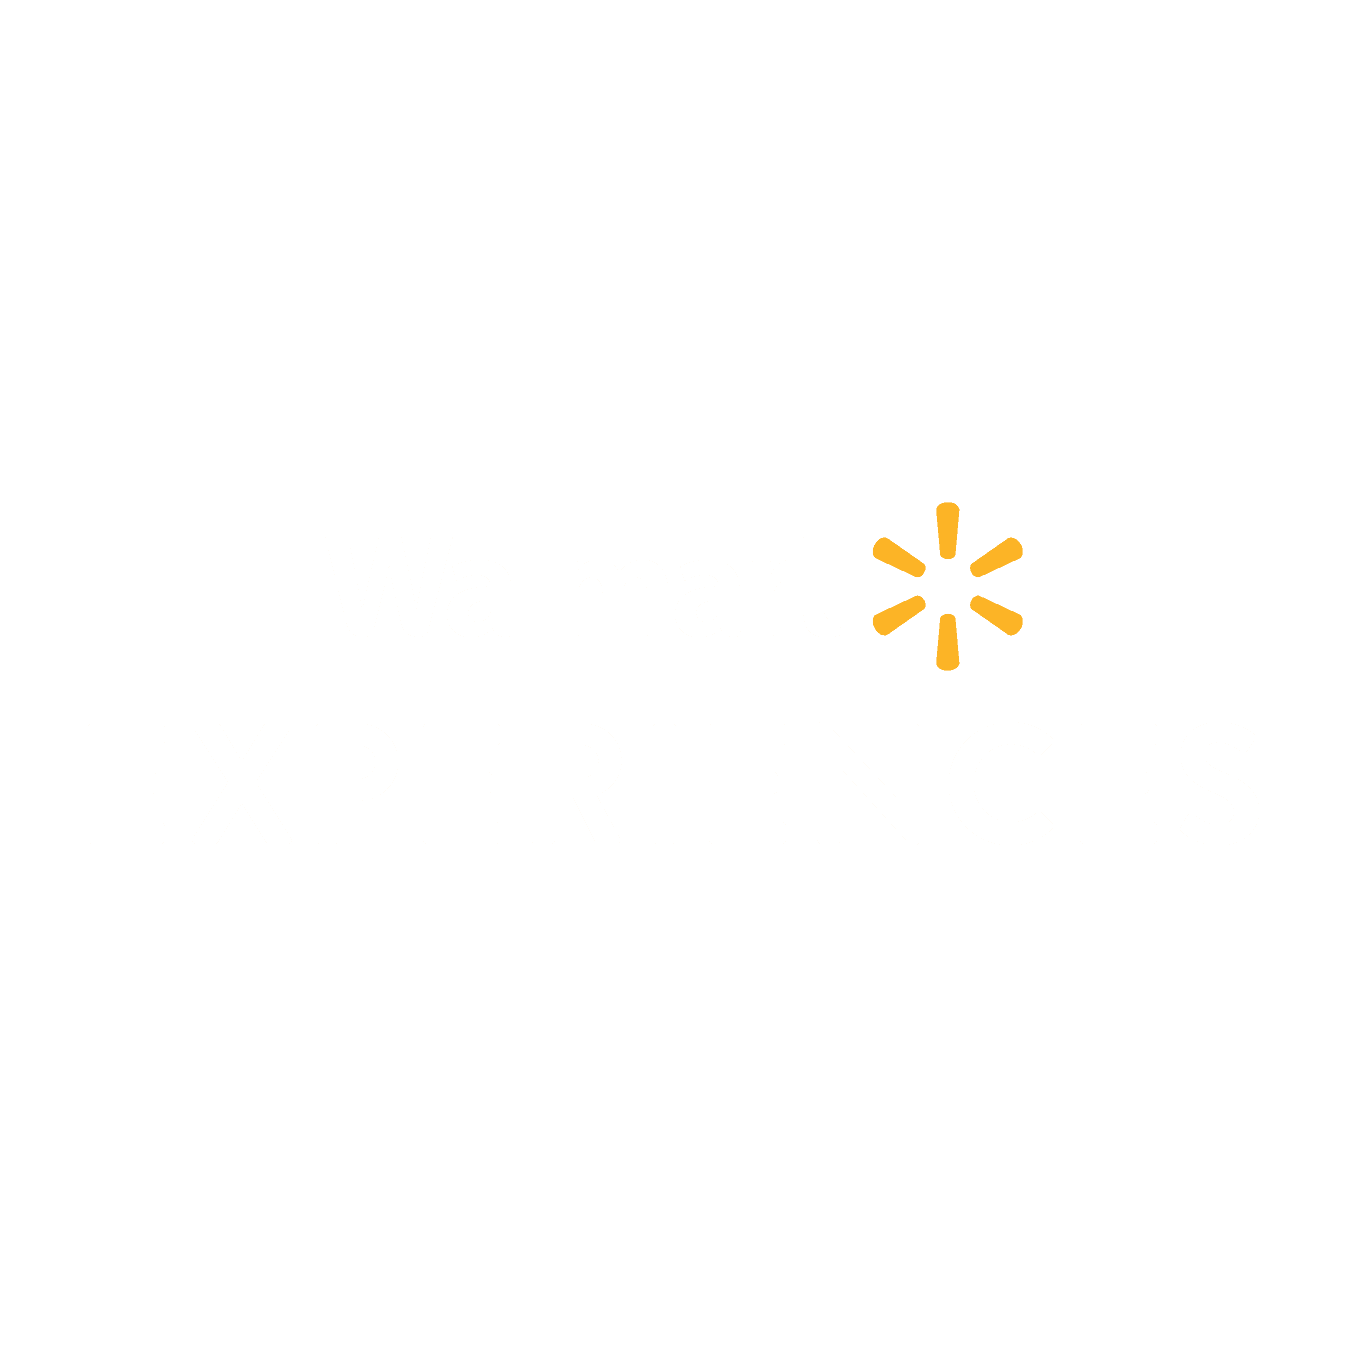 Learn more about Walmart experiences